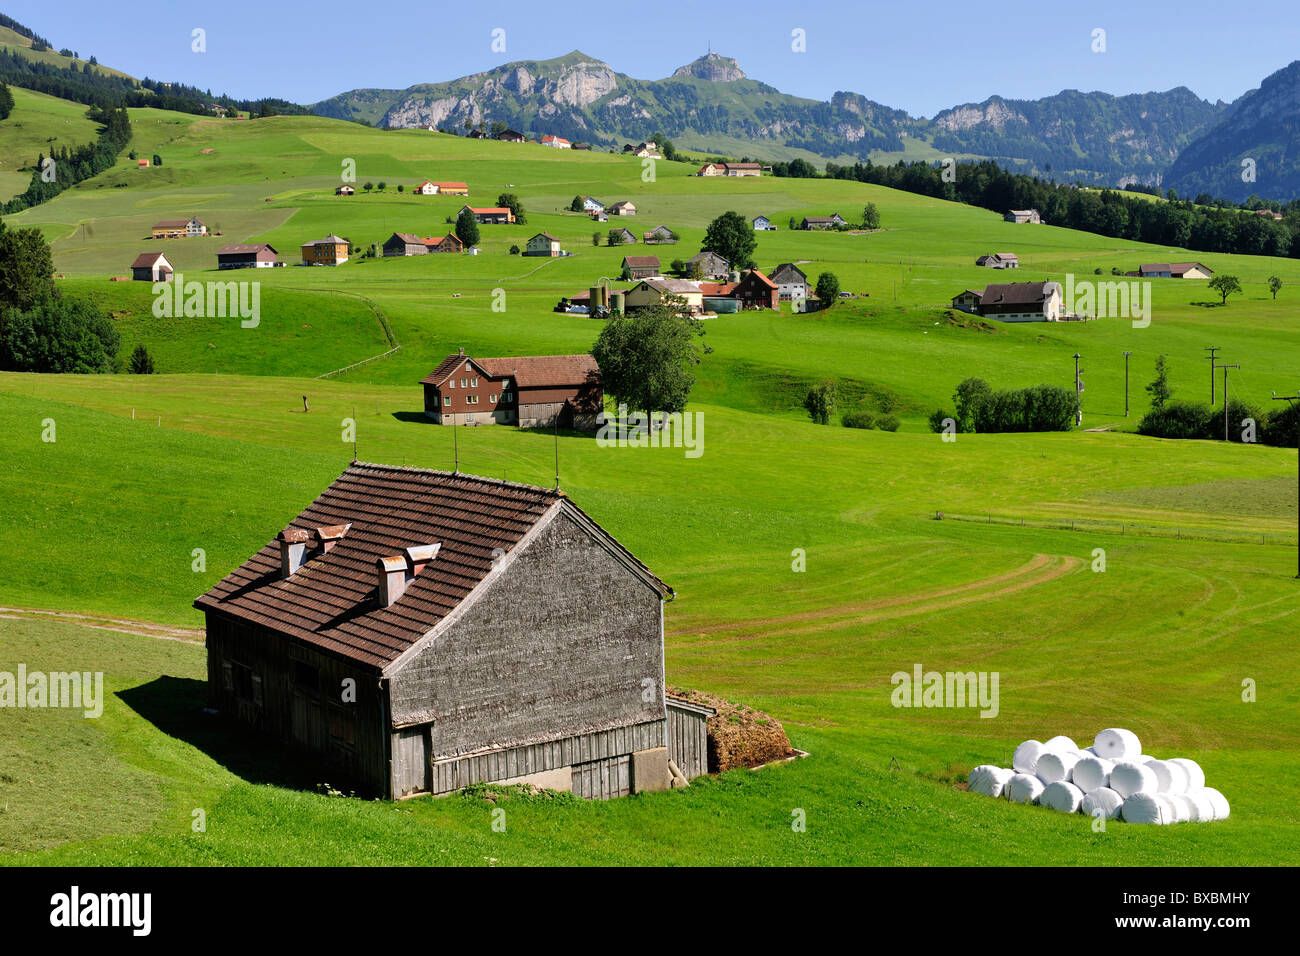 Landscape in the canton of Appenzell in front of the Alpstein Mountains, Canton of Appenzell, Switzerland, Europe Stock Photo